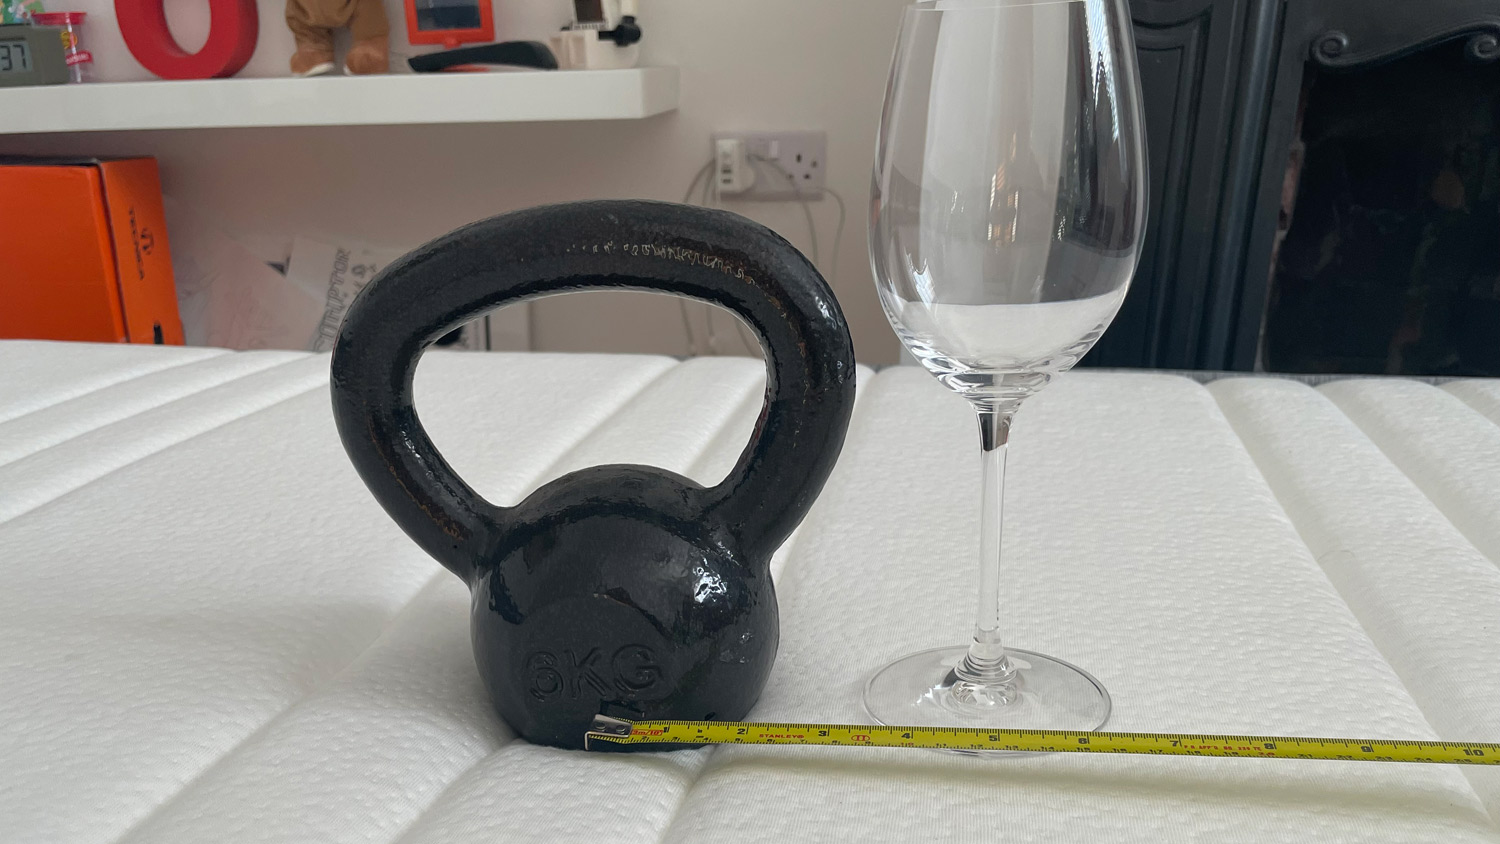 A weight, a wine glass and a tape measure on the Origin Hybrid Mattress